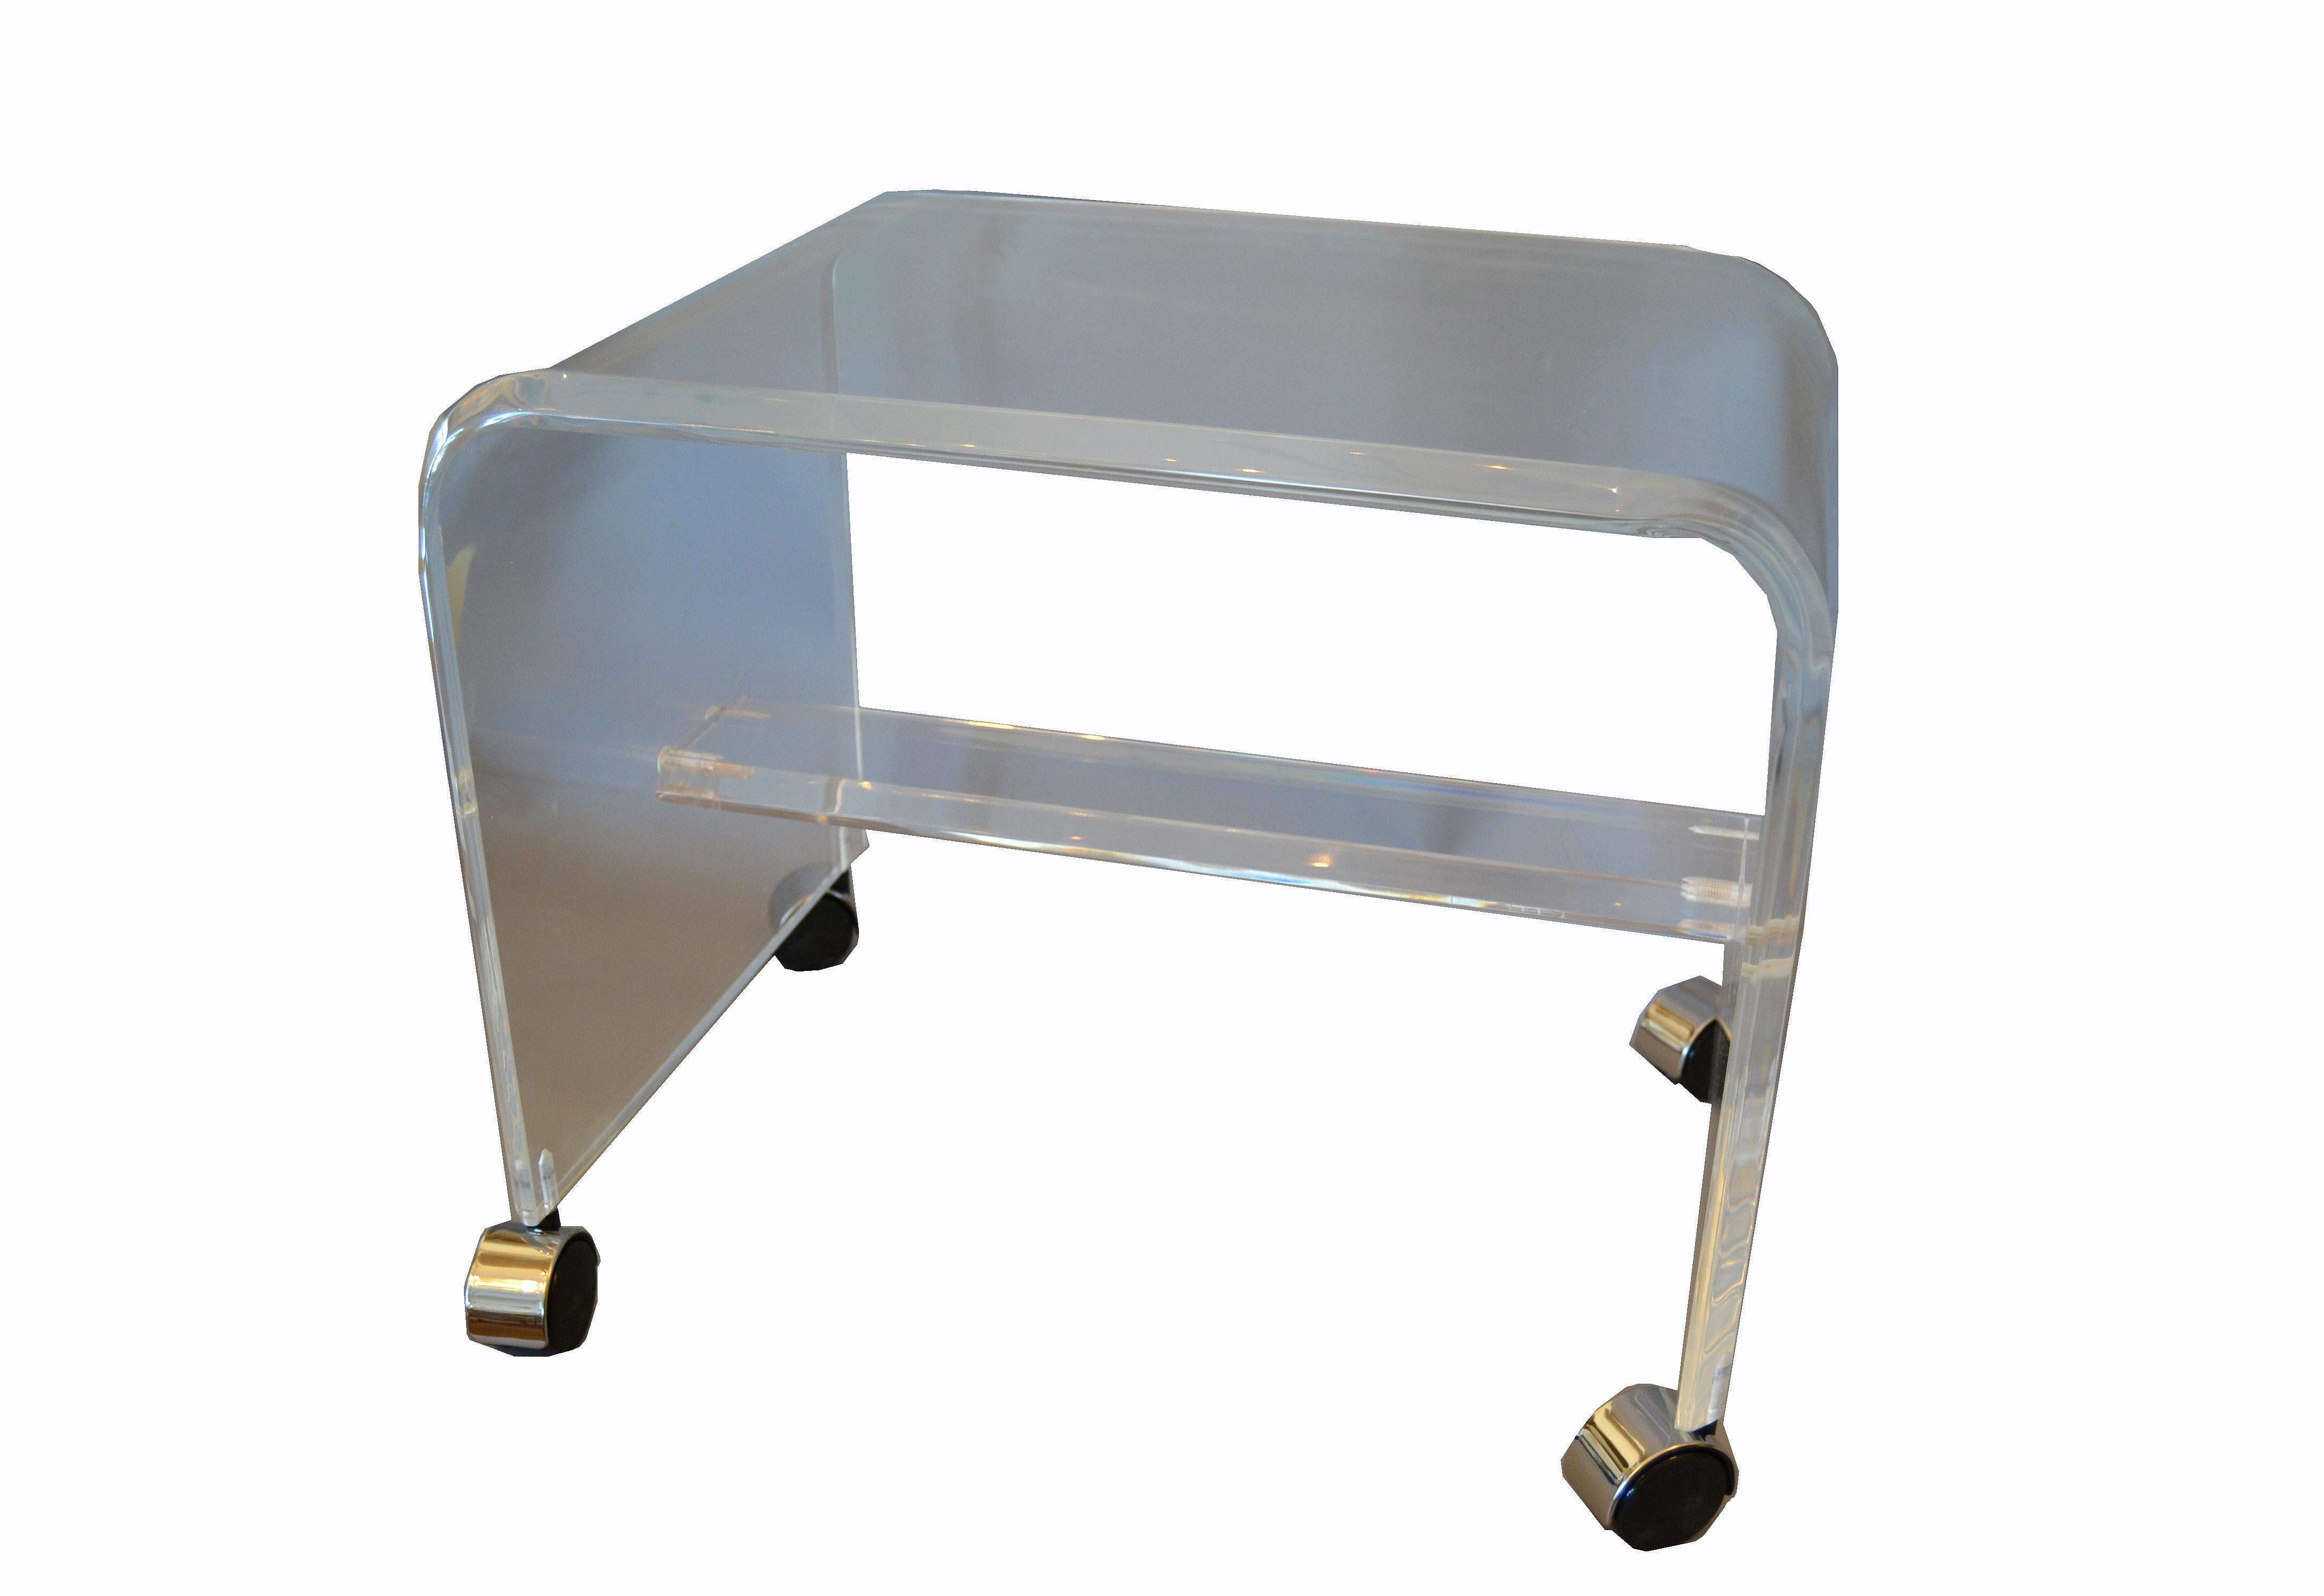 Polished Mid-Century Modern Lucite or Acrylic Stool, Vanity Stool on Chrome Casters